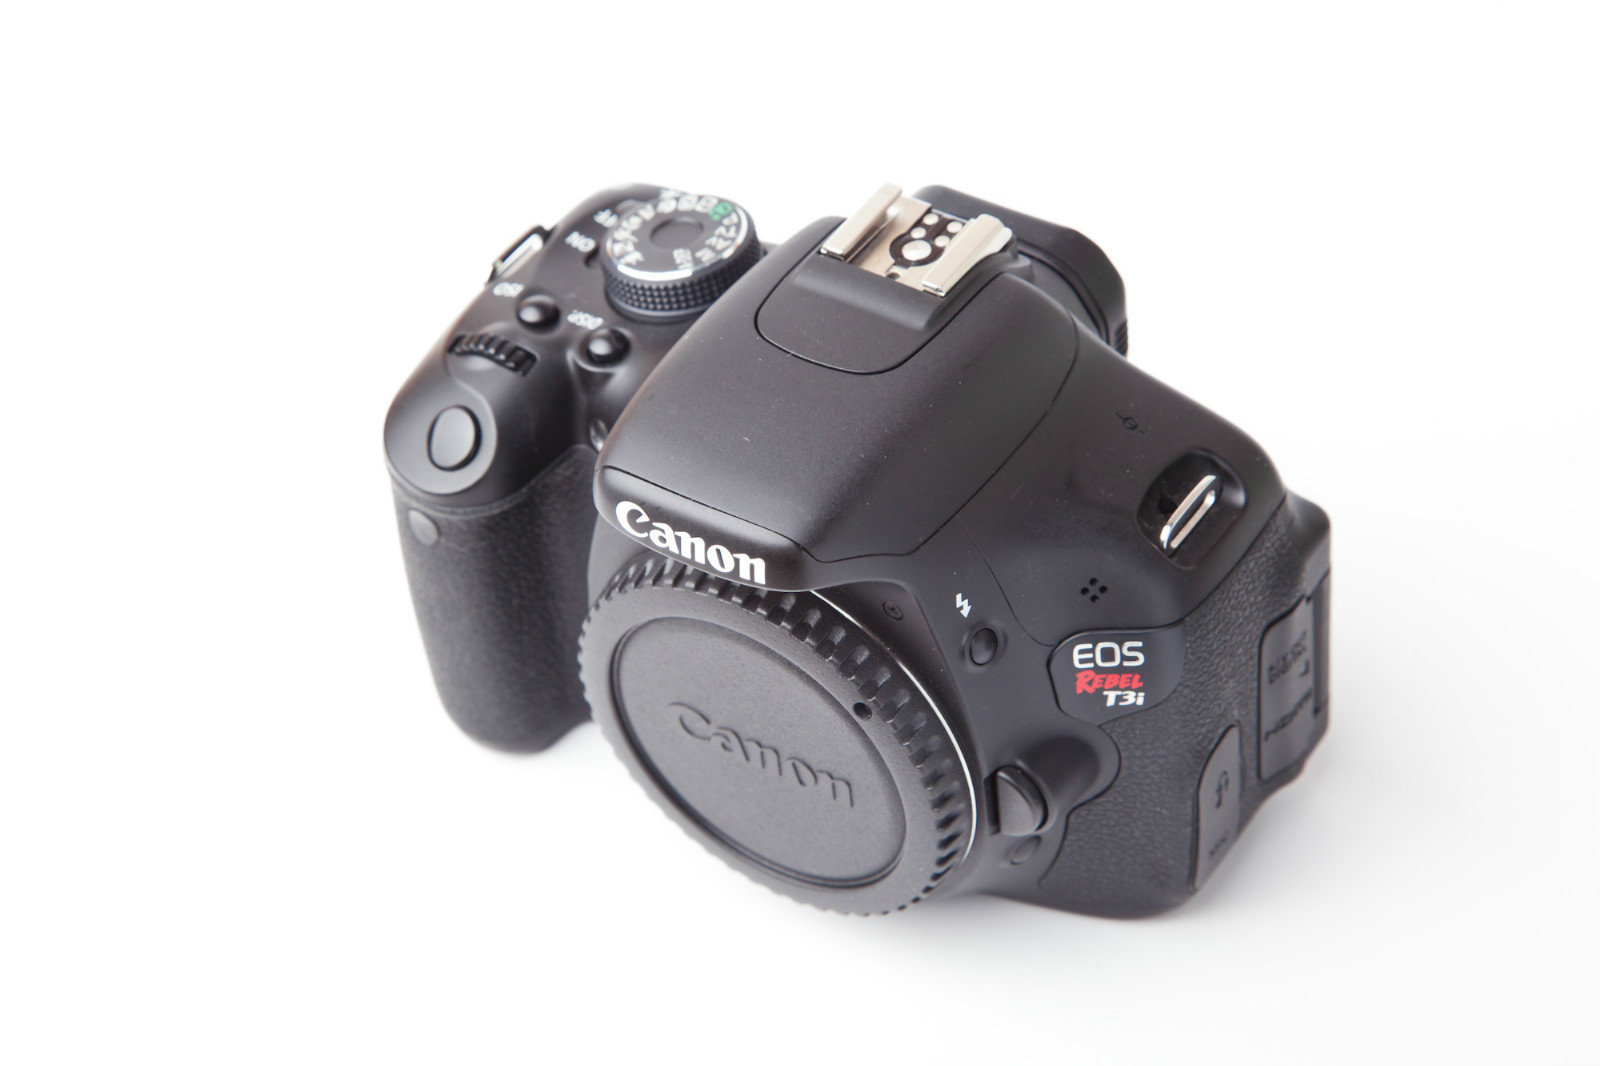 Canon Rebel T3i Top View